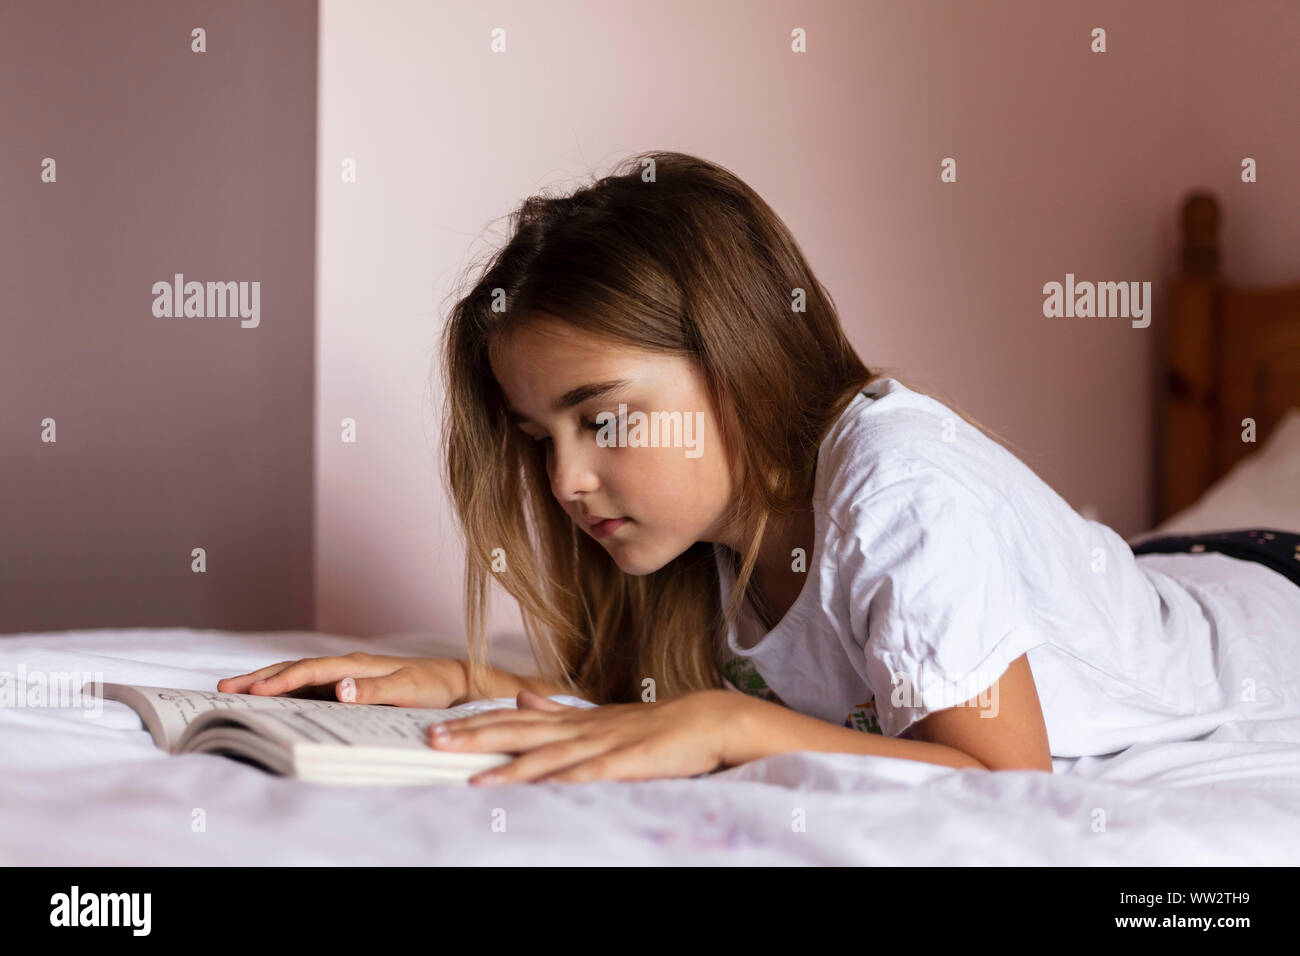 A girl aged 8 reading a book in her bedroom Stock Photo